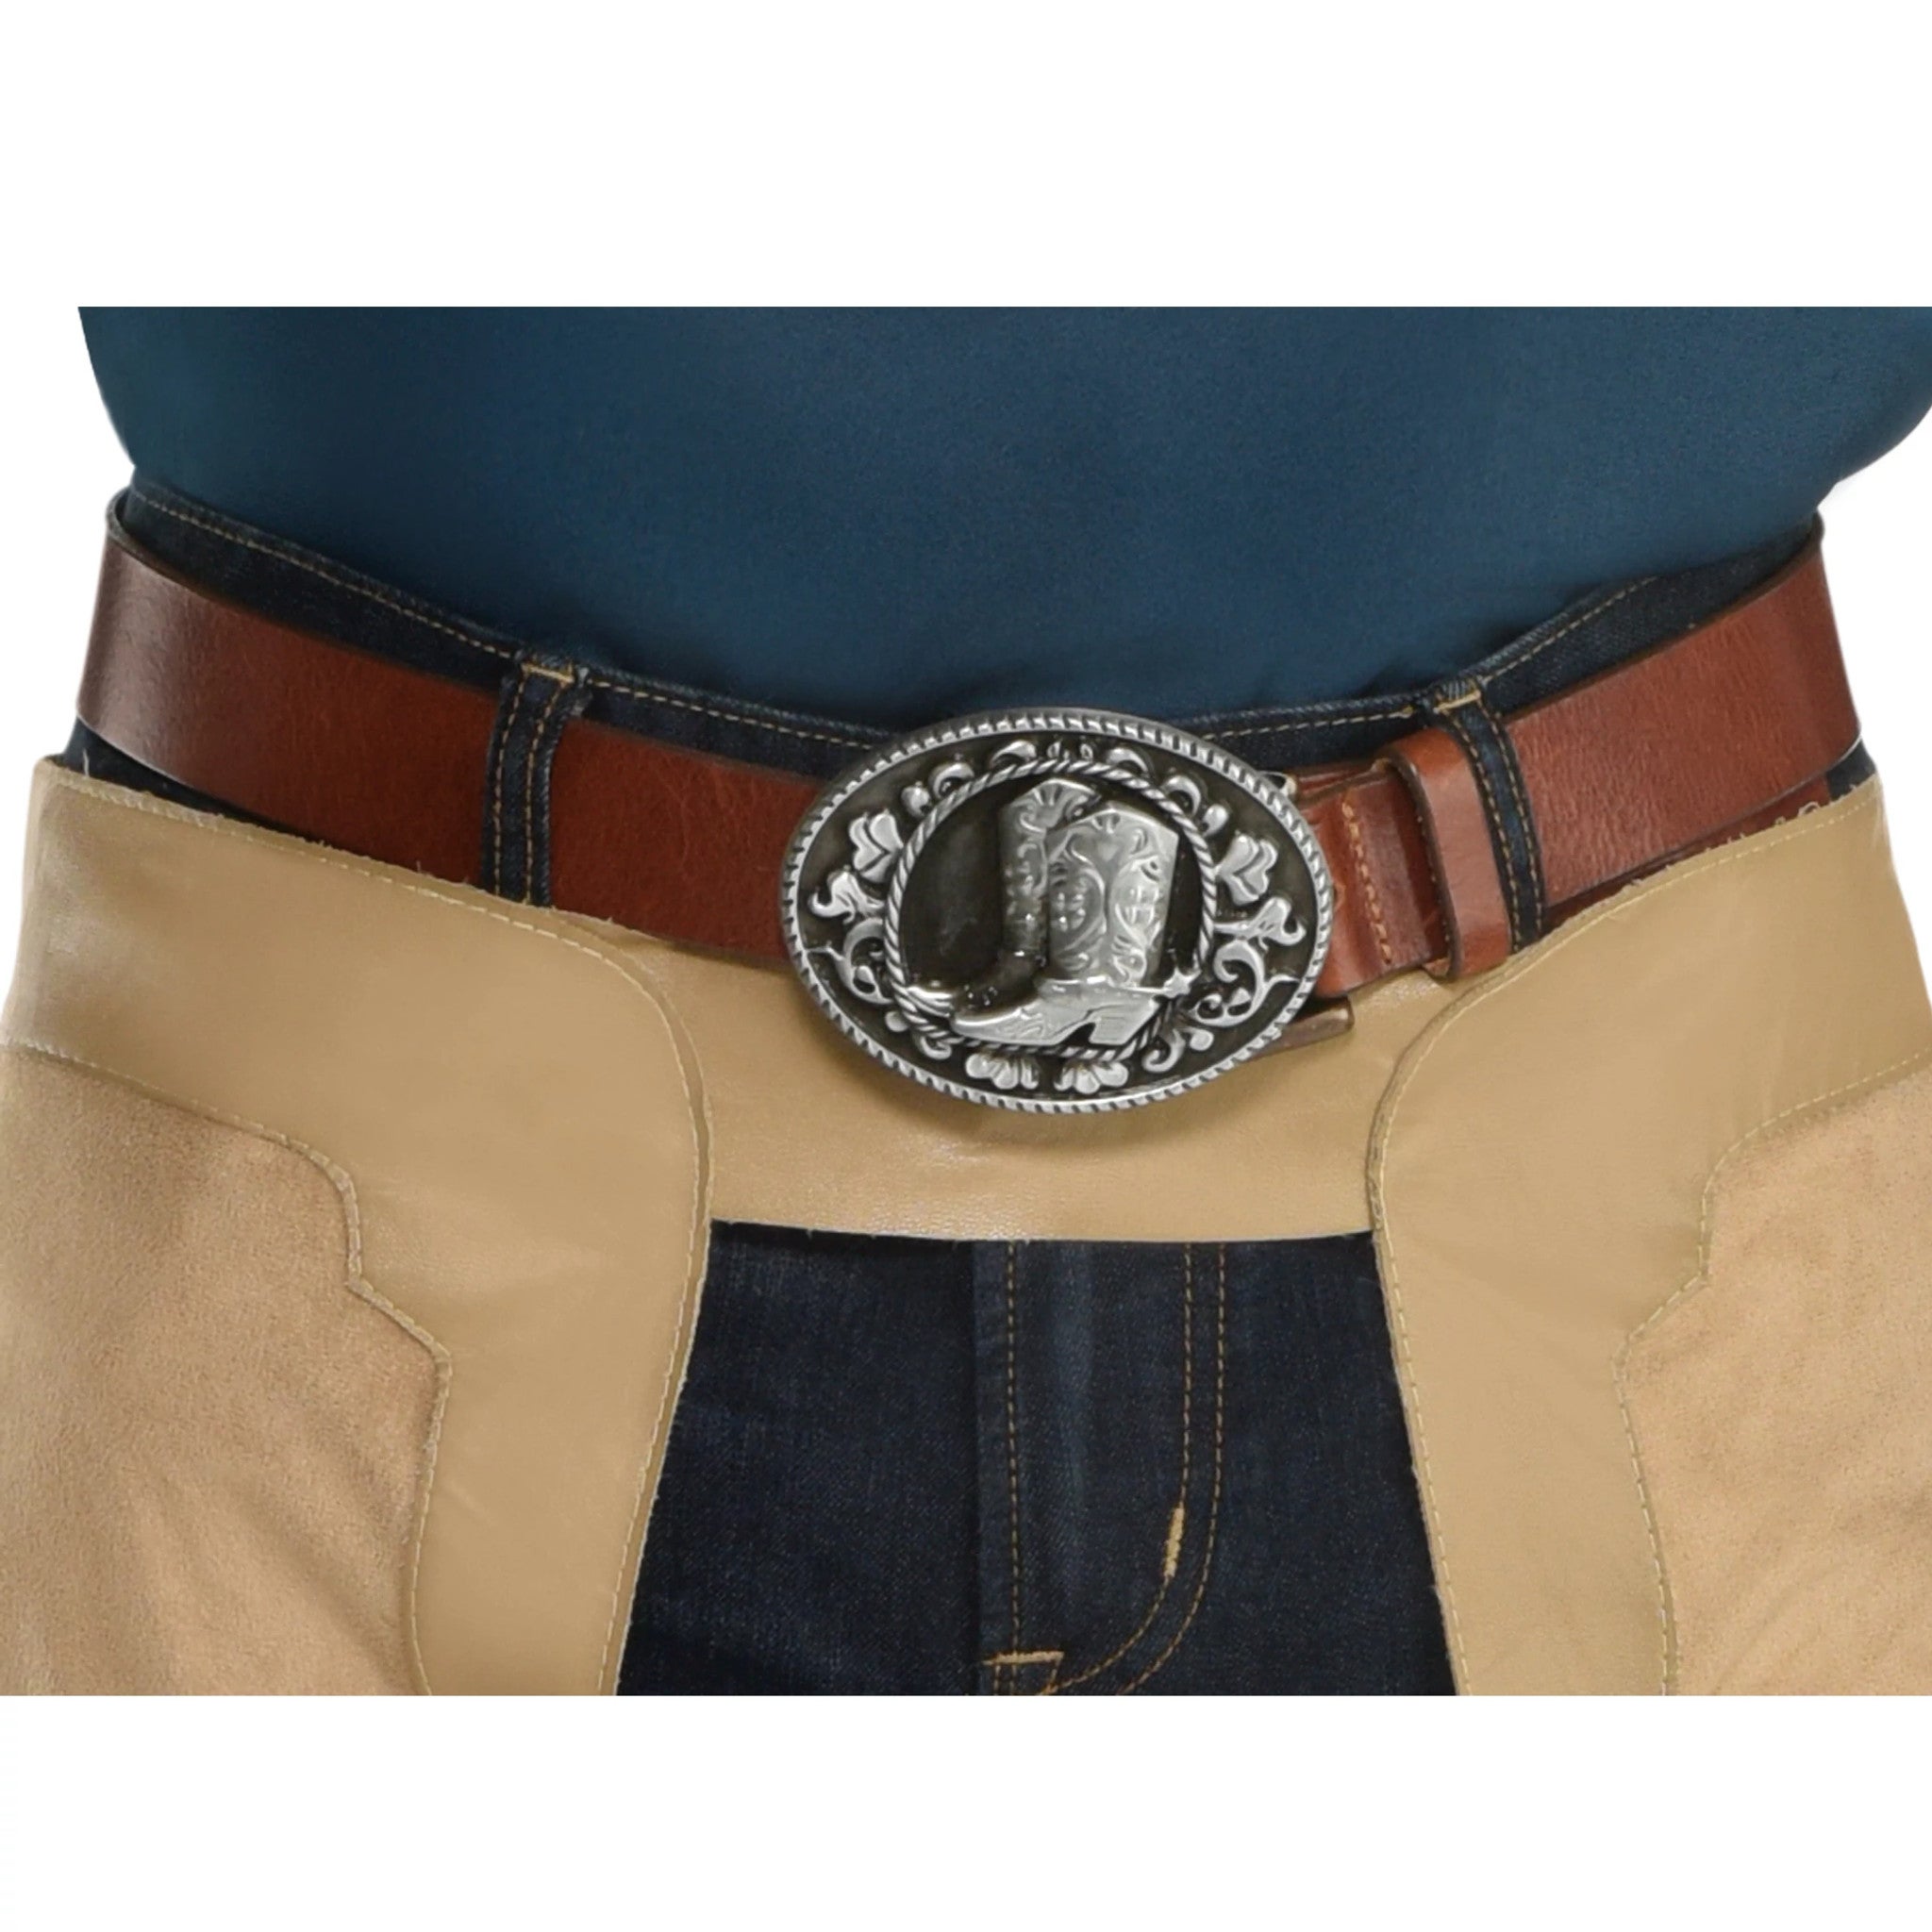 A metal belt buckle with a pair of cowboy boots on it